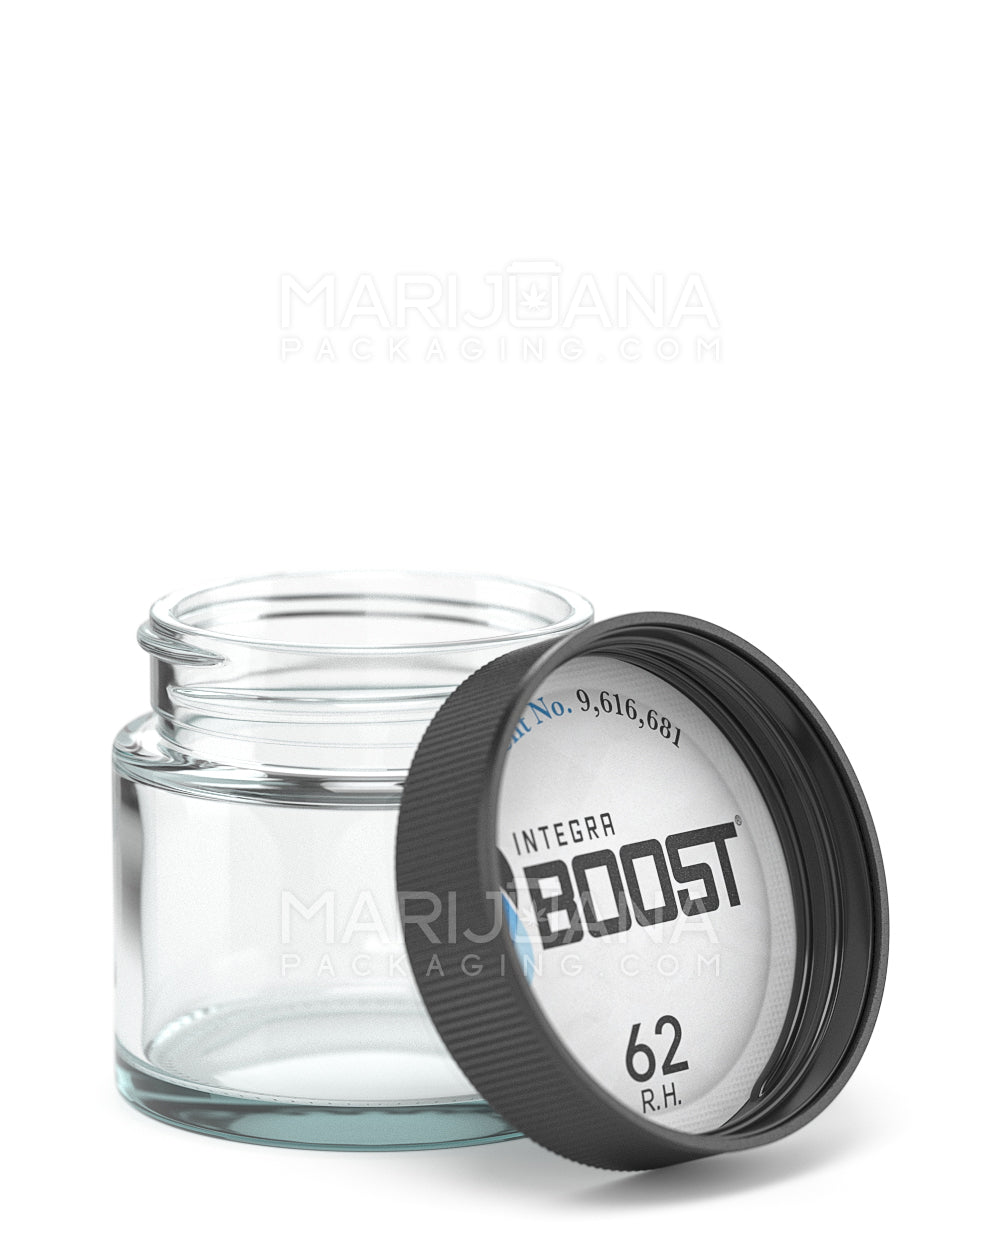 INTEGRA | Boost Humidity Pack | 50mm - 62% - 100 Count - 5